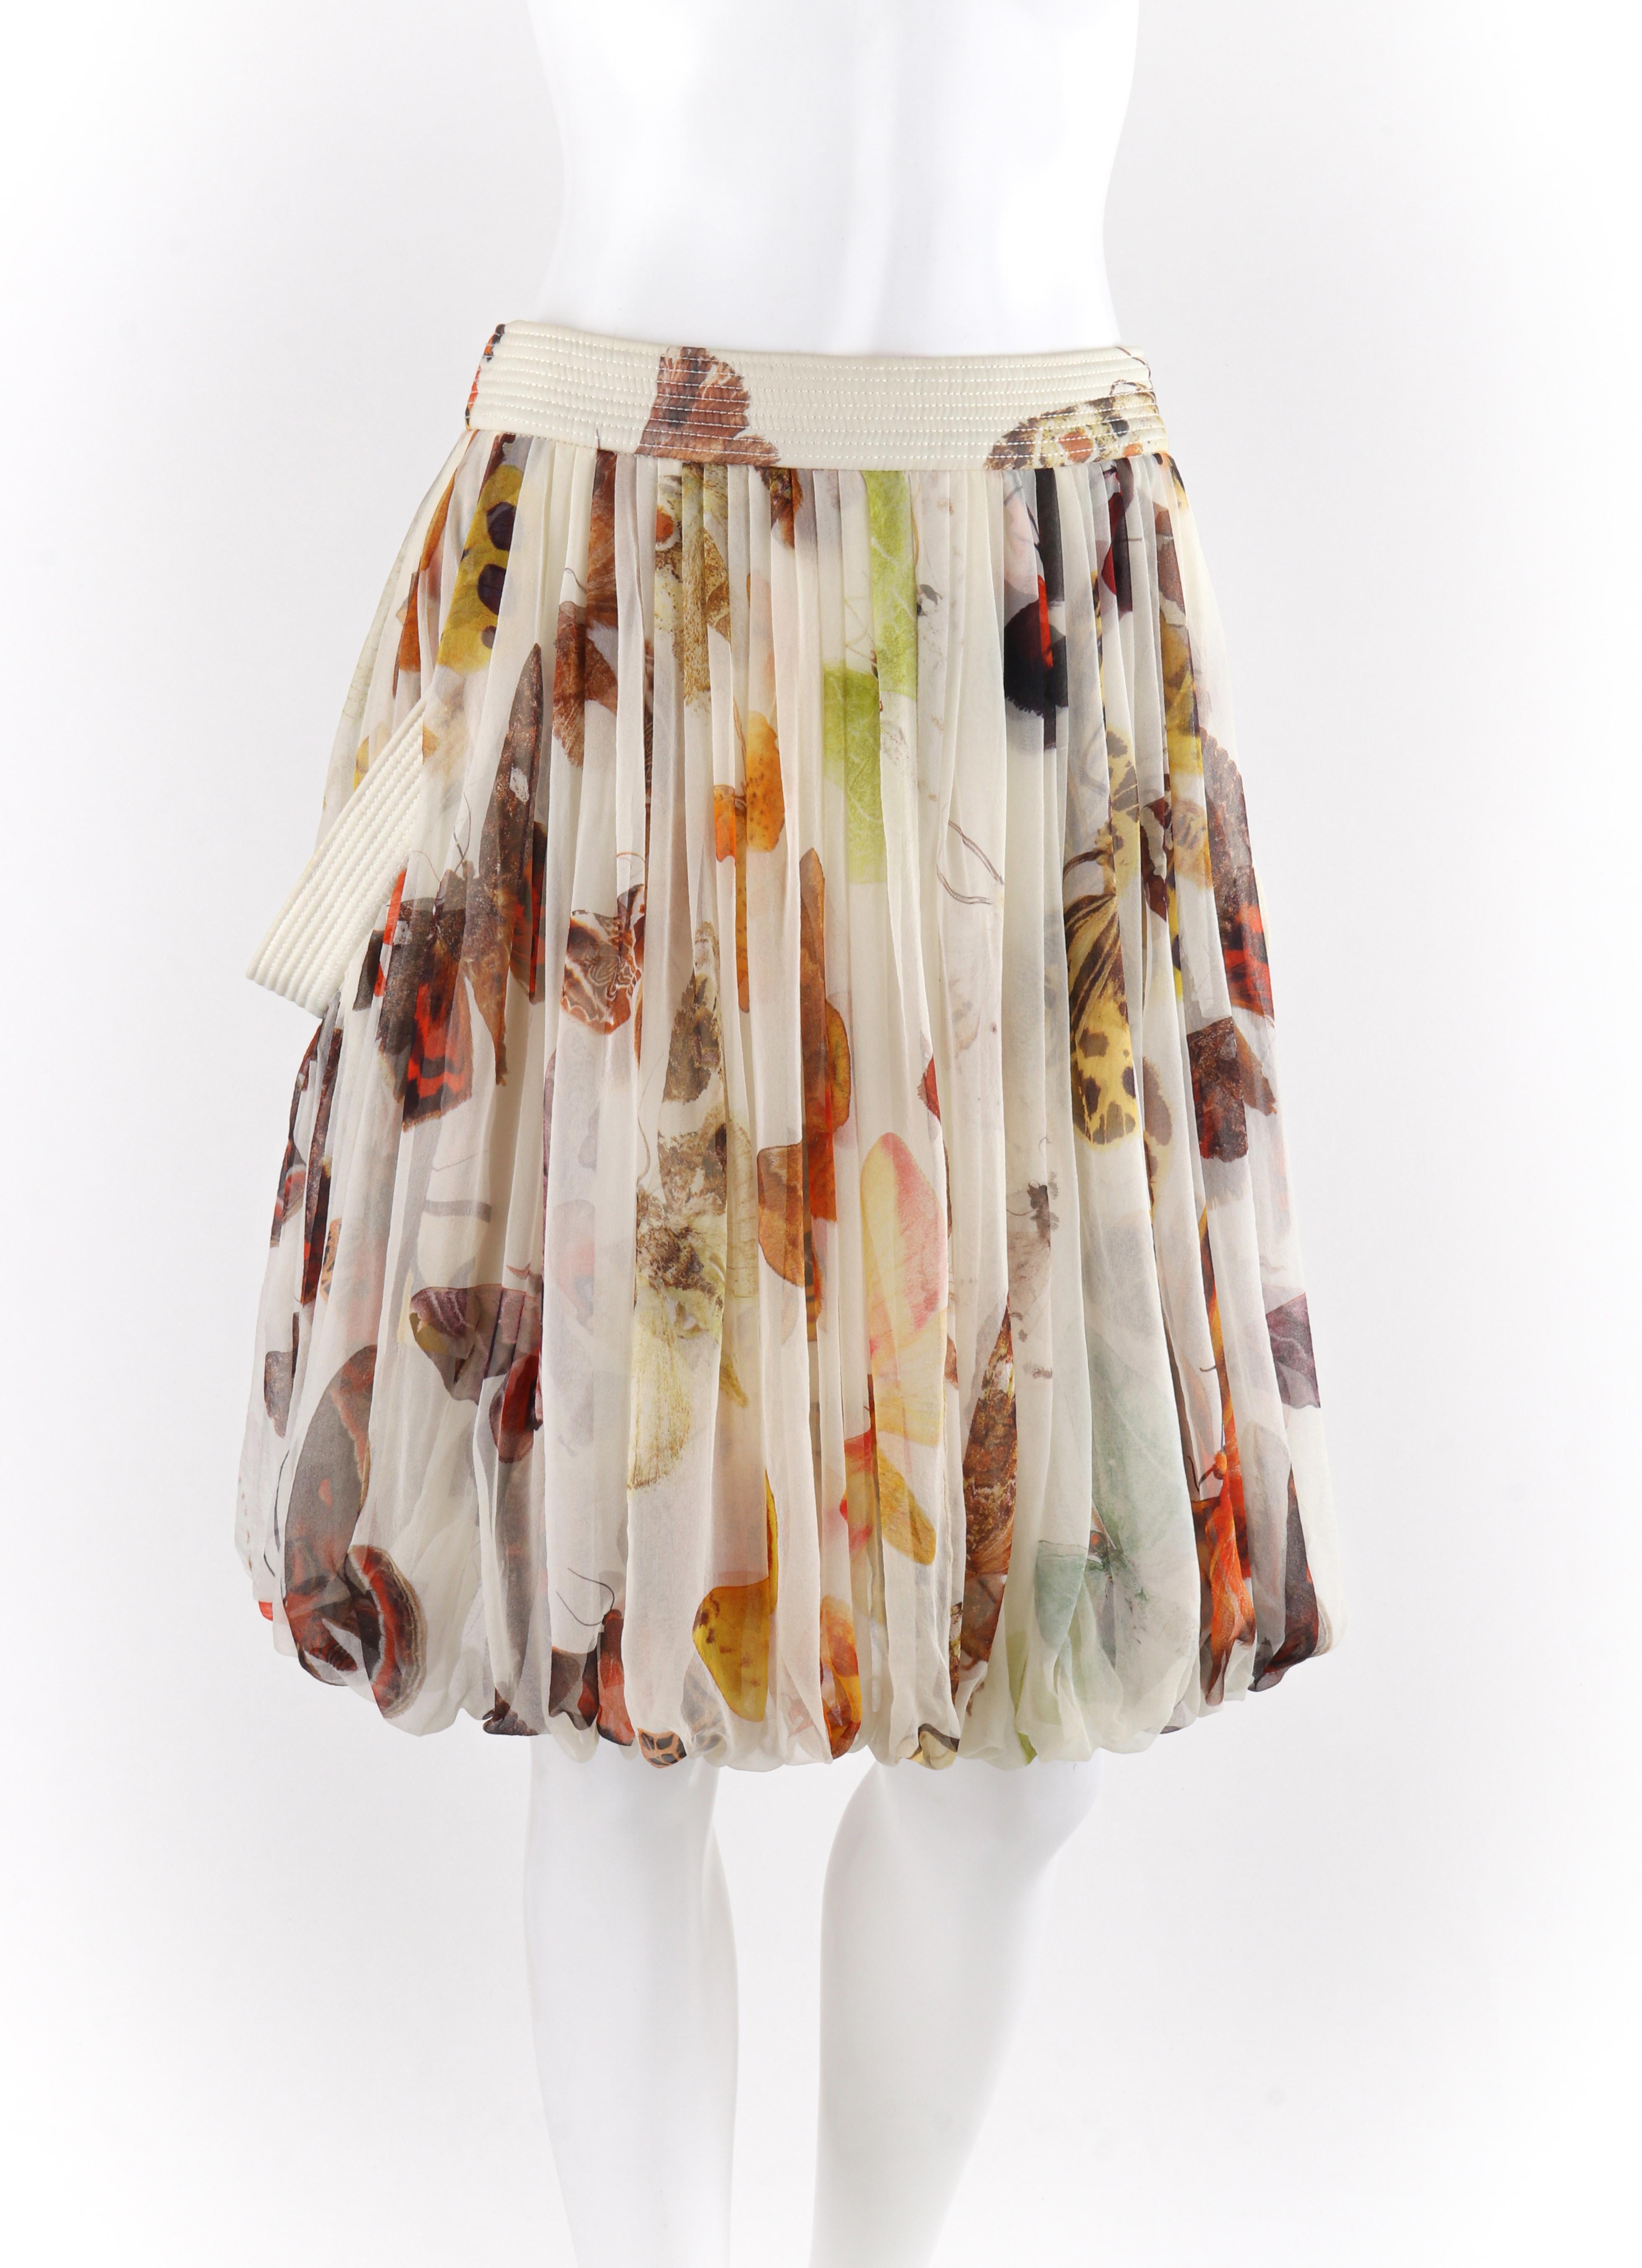 ALEXANDER McQUEEN S/S 2005 Silk Chiffon Butterfly Print Pleated Bubble Skirt 
 
Brand / Manufacturer: Alexander McQueen
Collection: S/S 2005
Style: Bubble Skirt
Color(s): Multicolor with ivory background
Lined: Yes
Marked Fabric Content: 100%